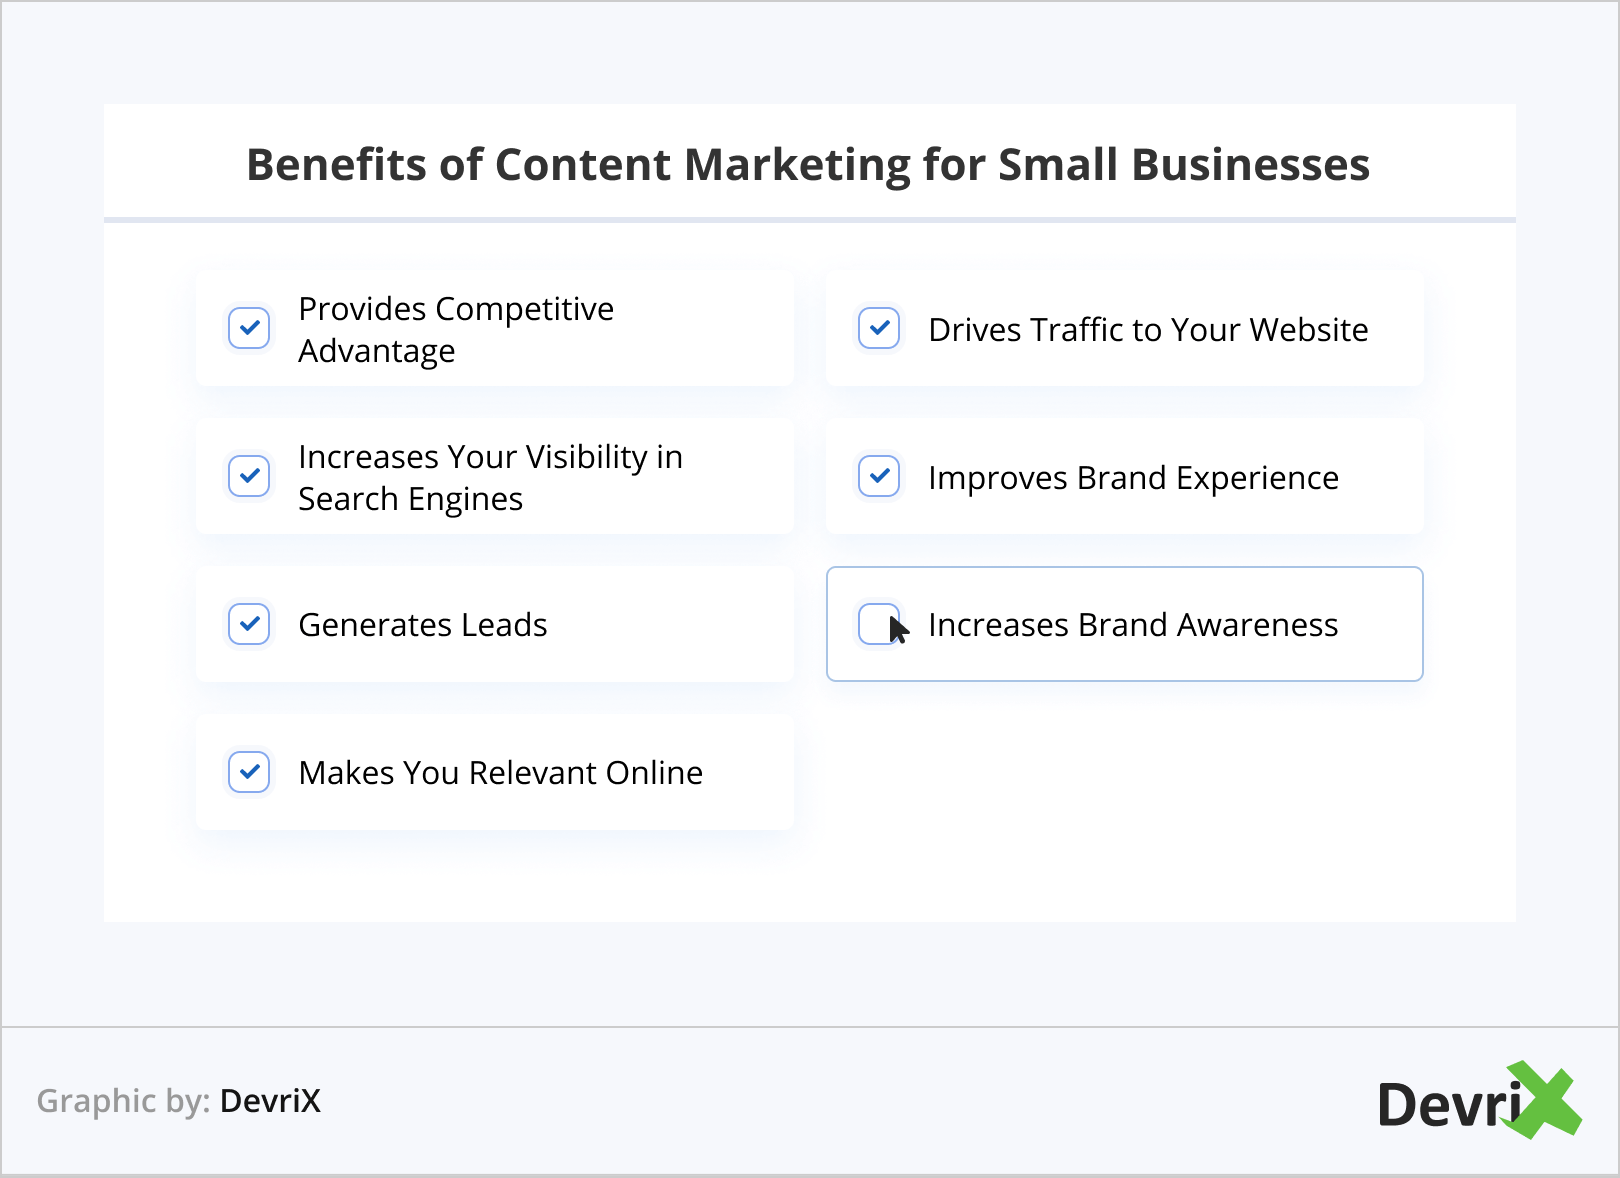 Benefits of Content Marketing for Small Businesses